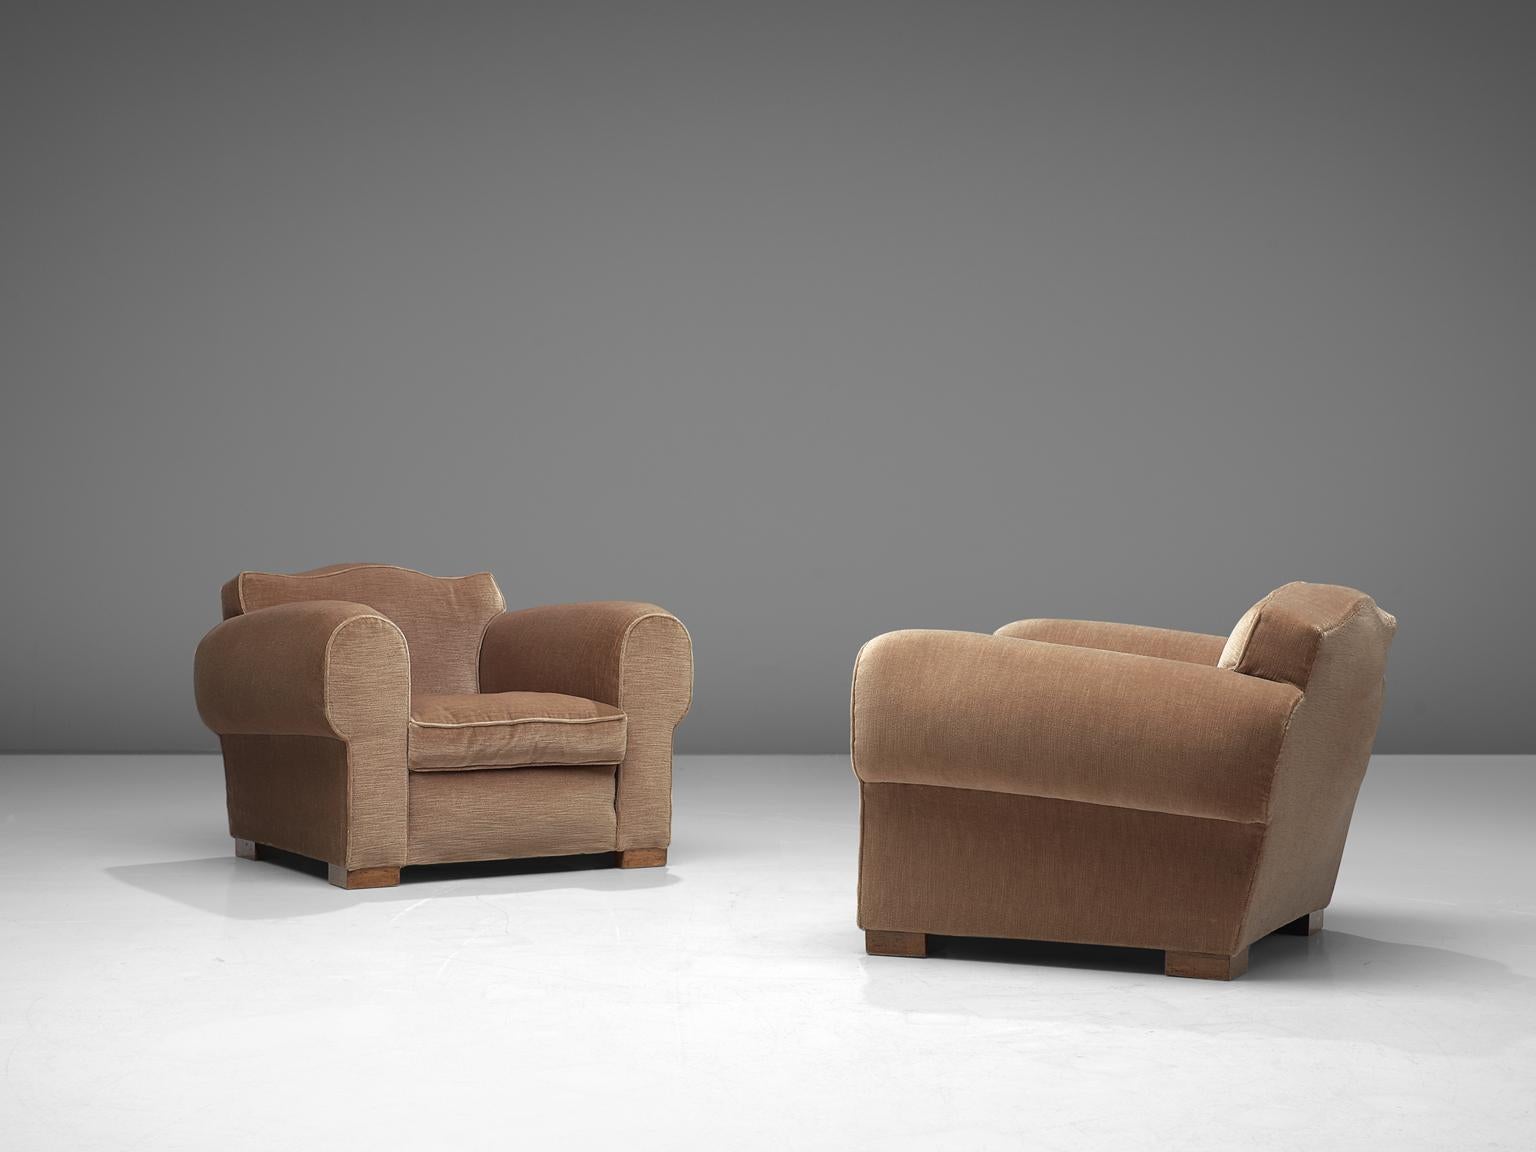 Maurice Rinck, pair of lounge chairs, velvet and oak, France, 1940s

Grand and comfortable set of two club chairs in taupe velvet upholstery. Truly extraordinary and luxurious chairs that feature a deep seat and large rounded, curved armrests. The